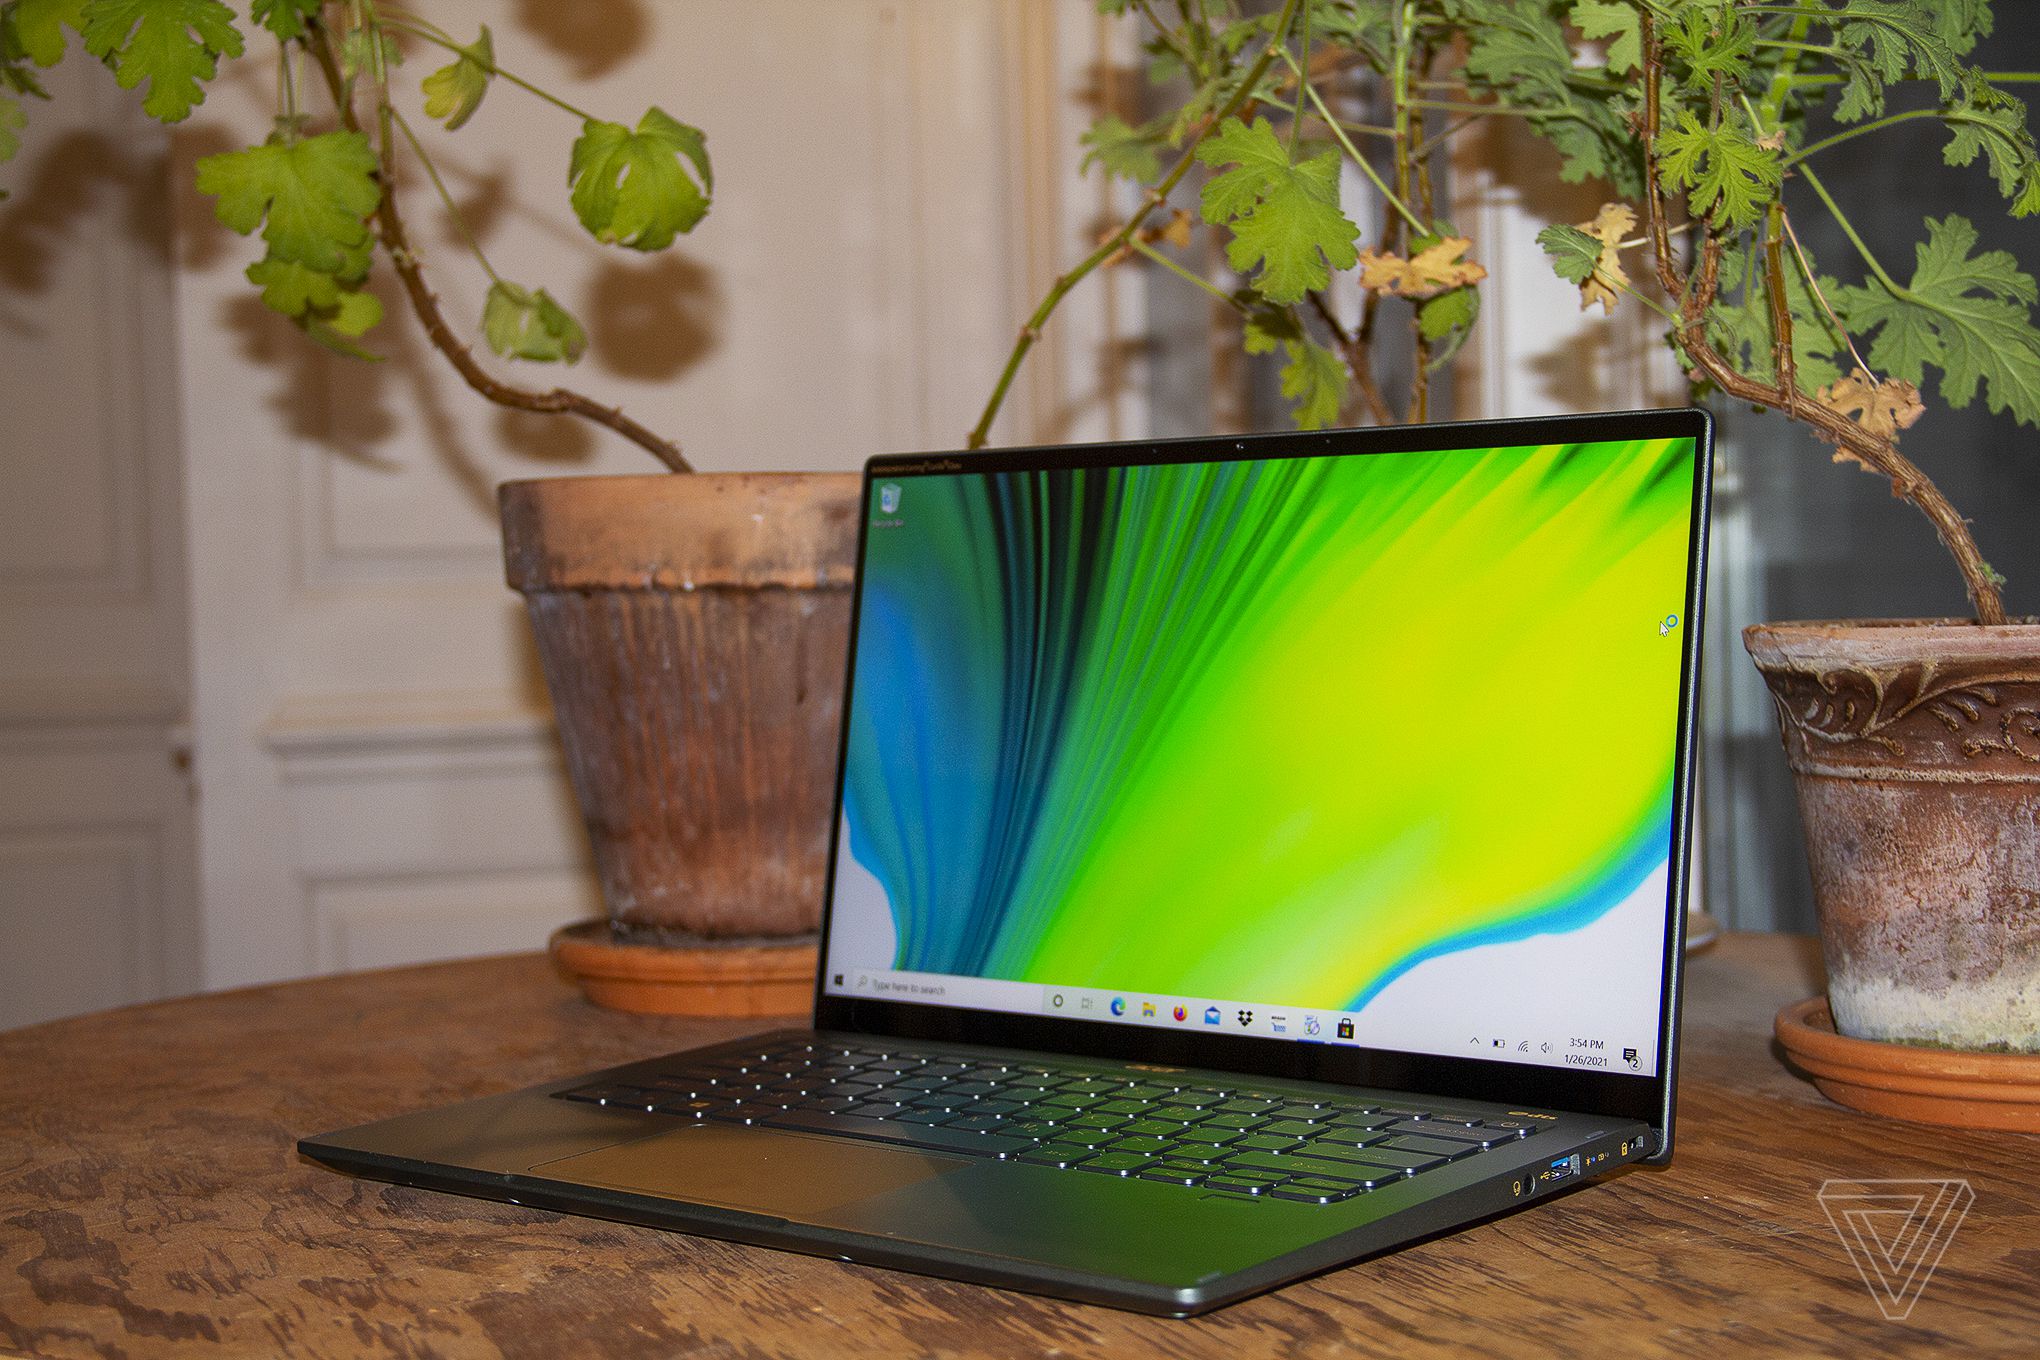 The Acer Swift 5 on a table in front of two house plants, open and angled to the left. The screen displays a green, blue, and white background.